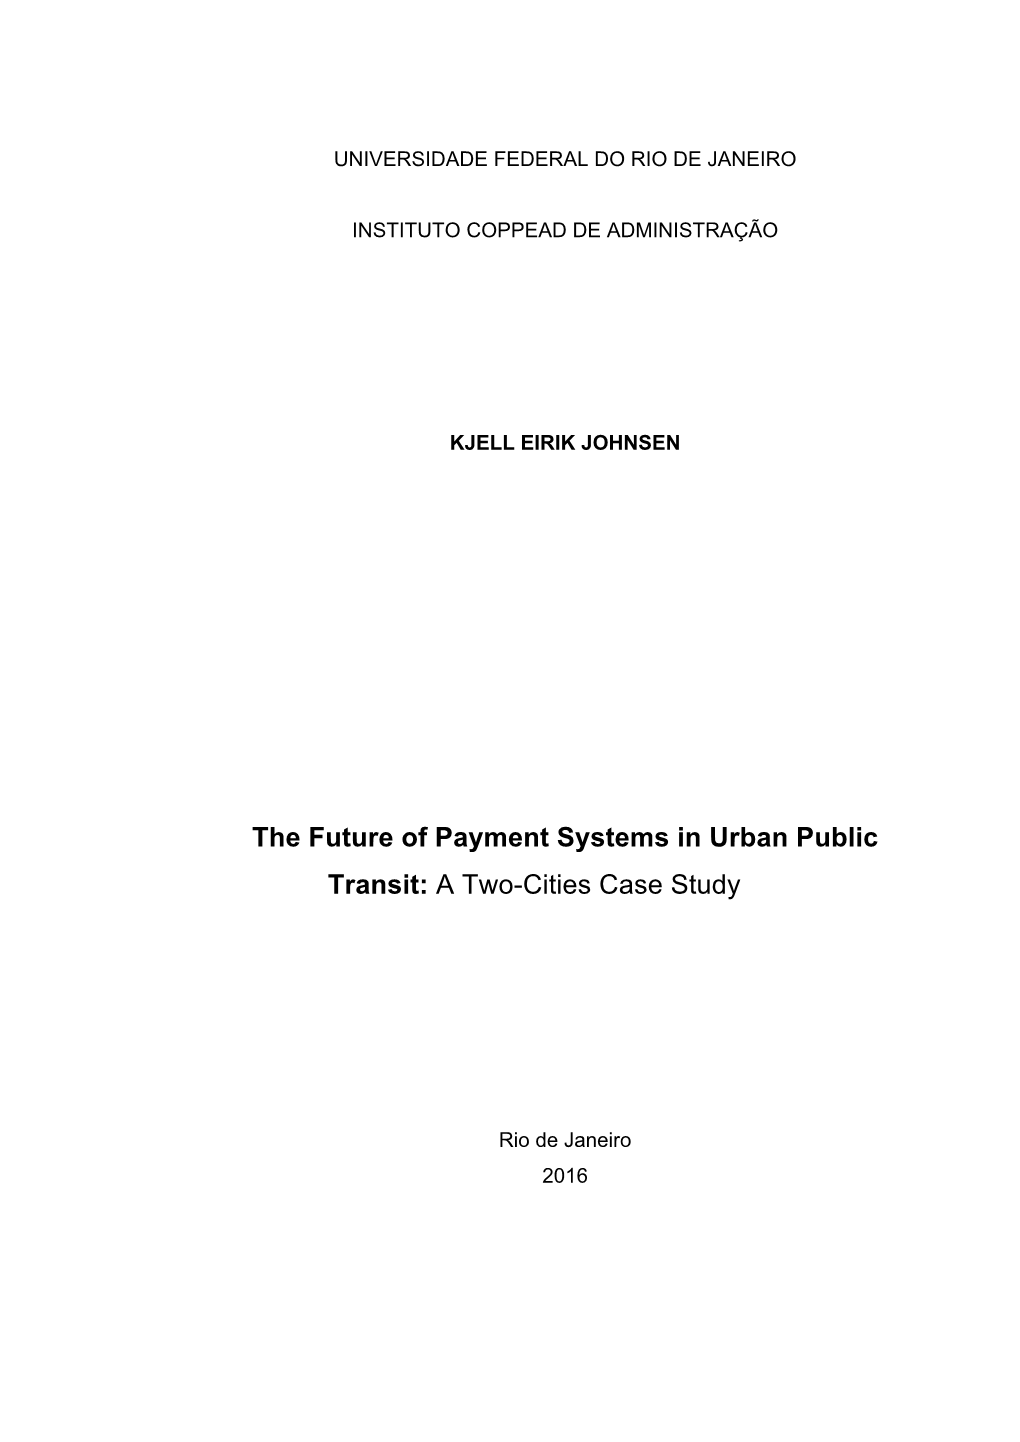 The Future of Payment Systems in Urban Public Transit: a Two-Cities Case Study